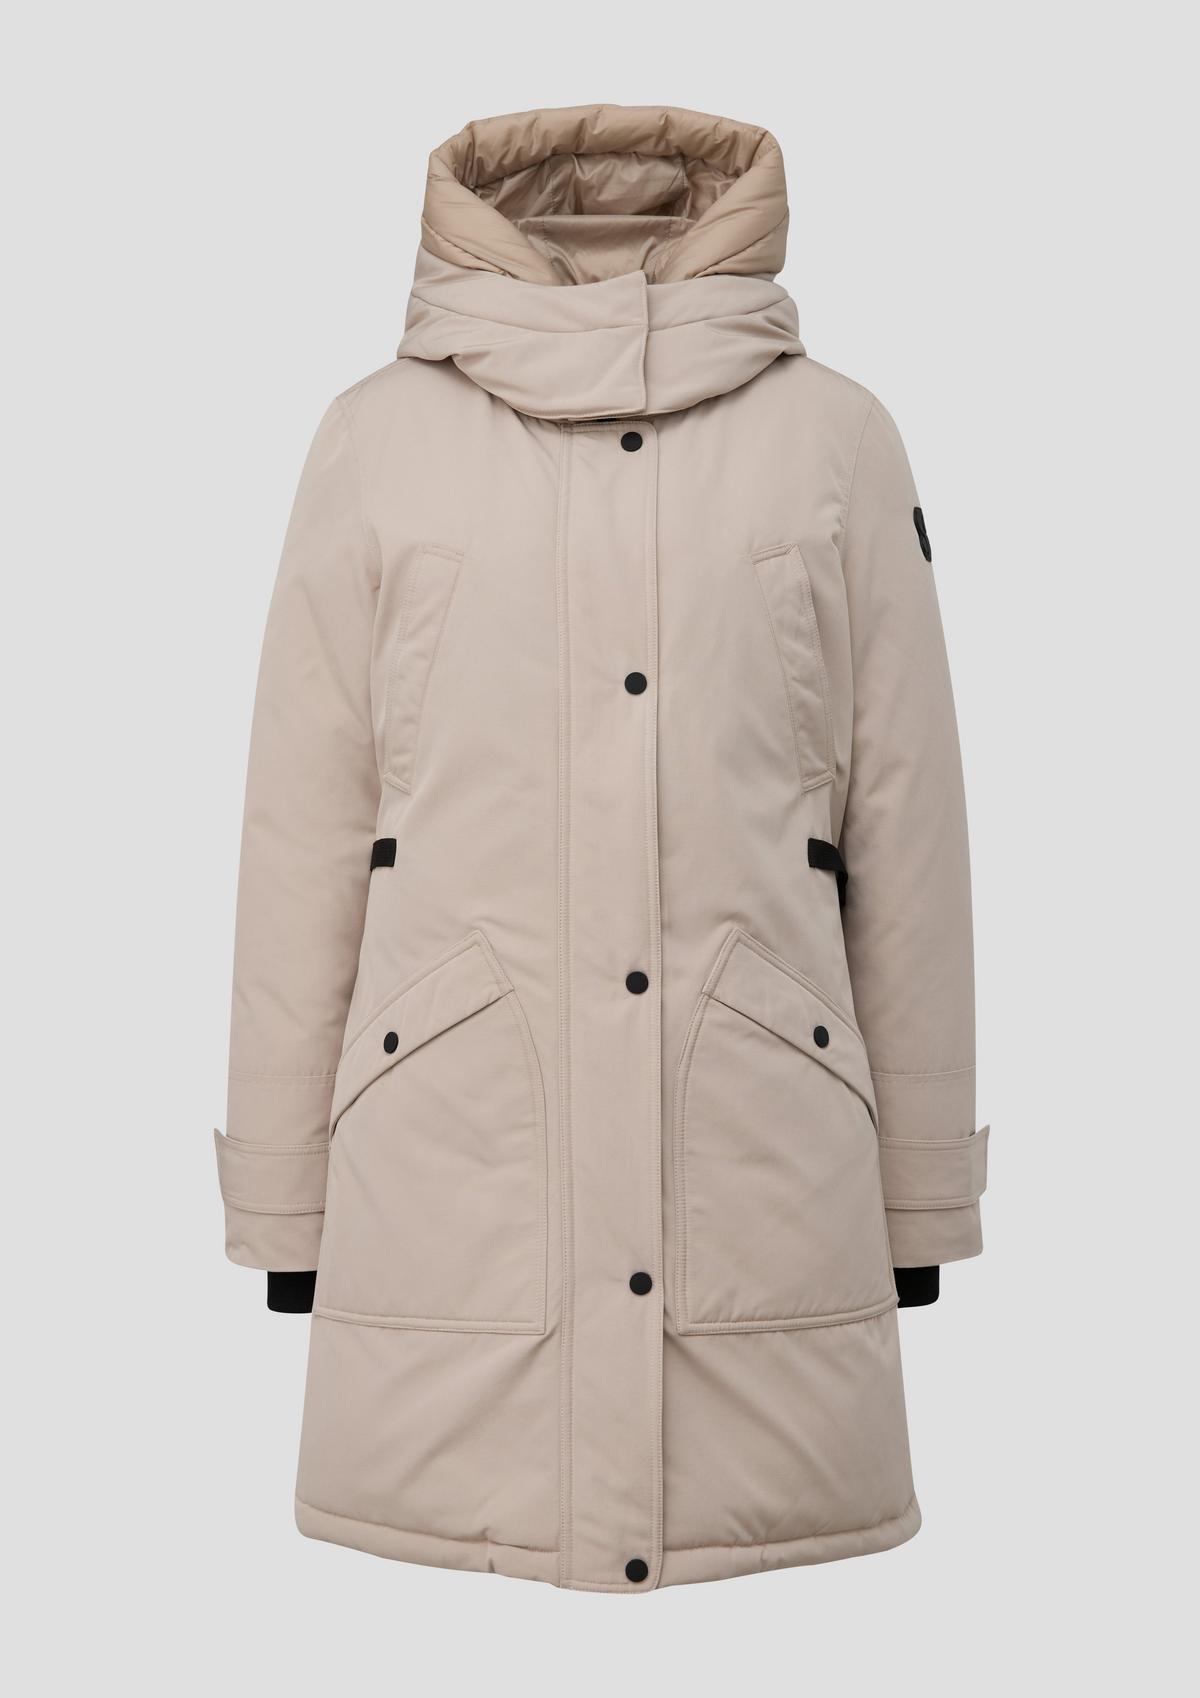 Parka with a double hood - light beige